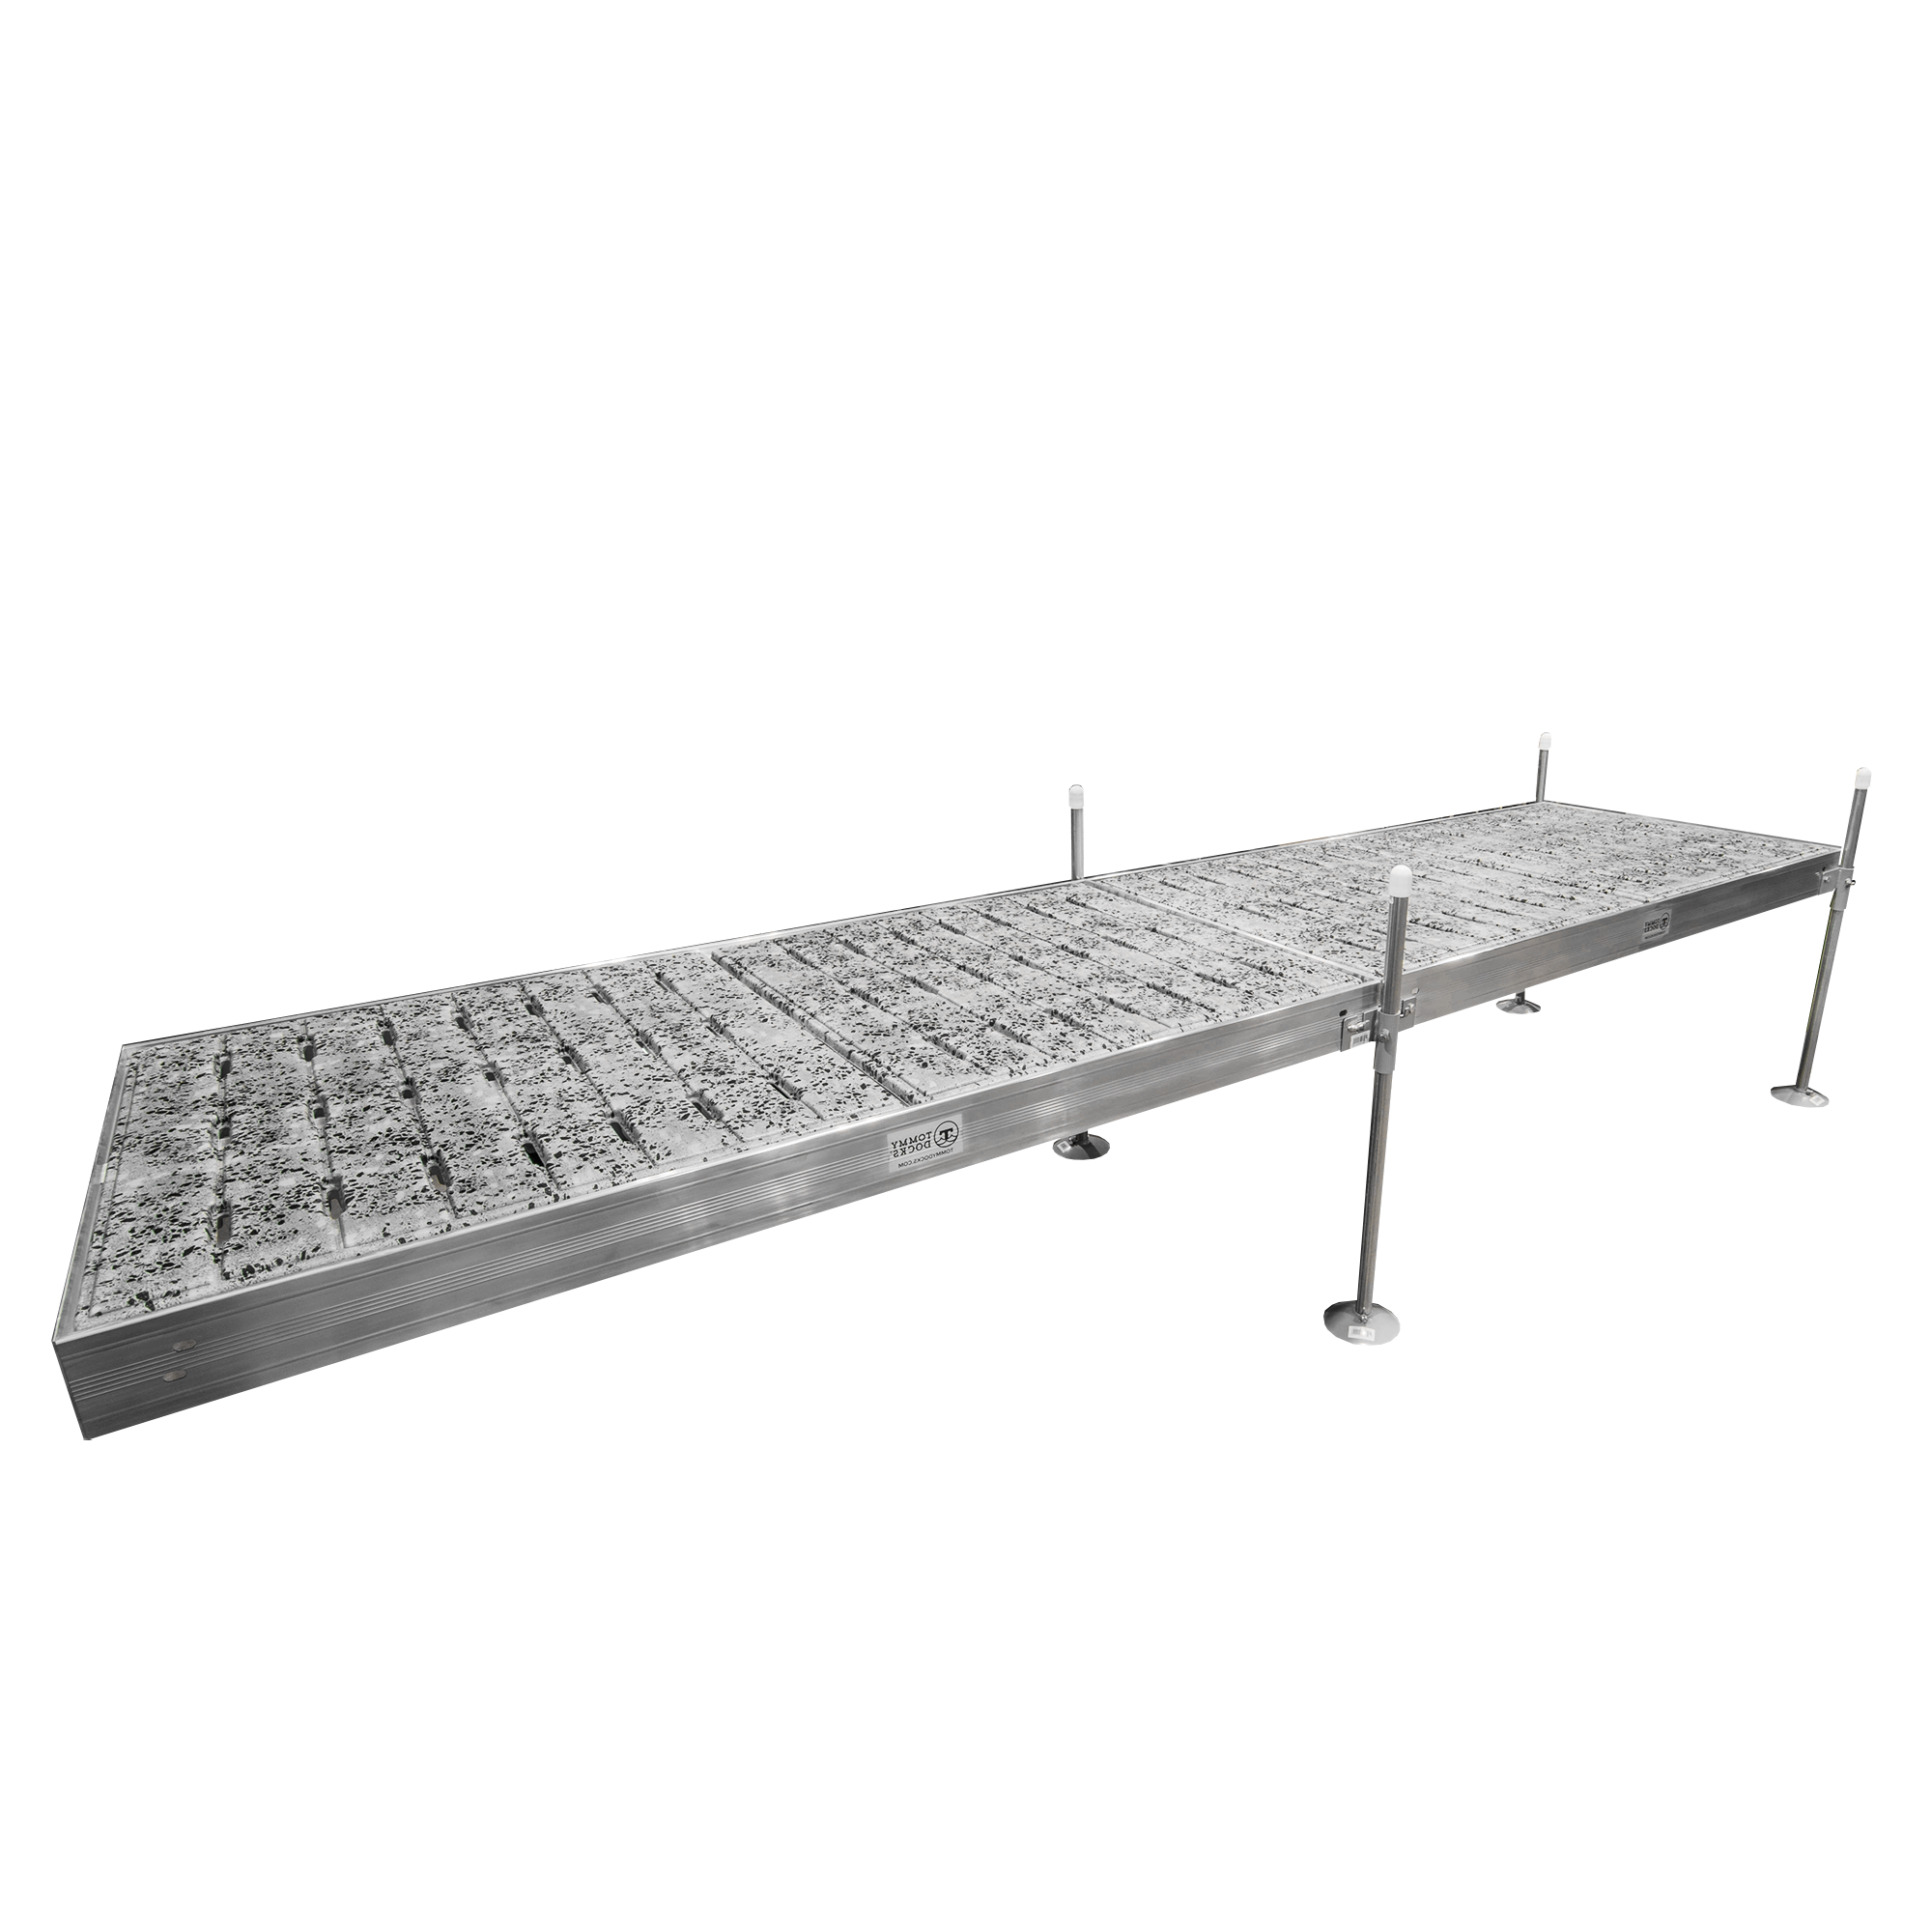 16' Straight Boat Dock System with Aluminum Frame and Thermoformed Terrazzo Decking